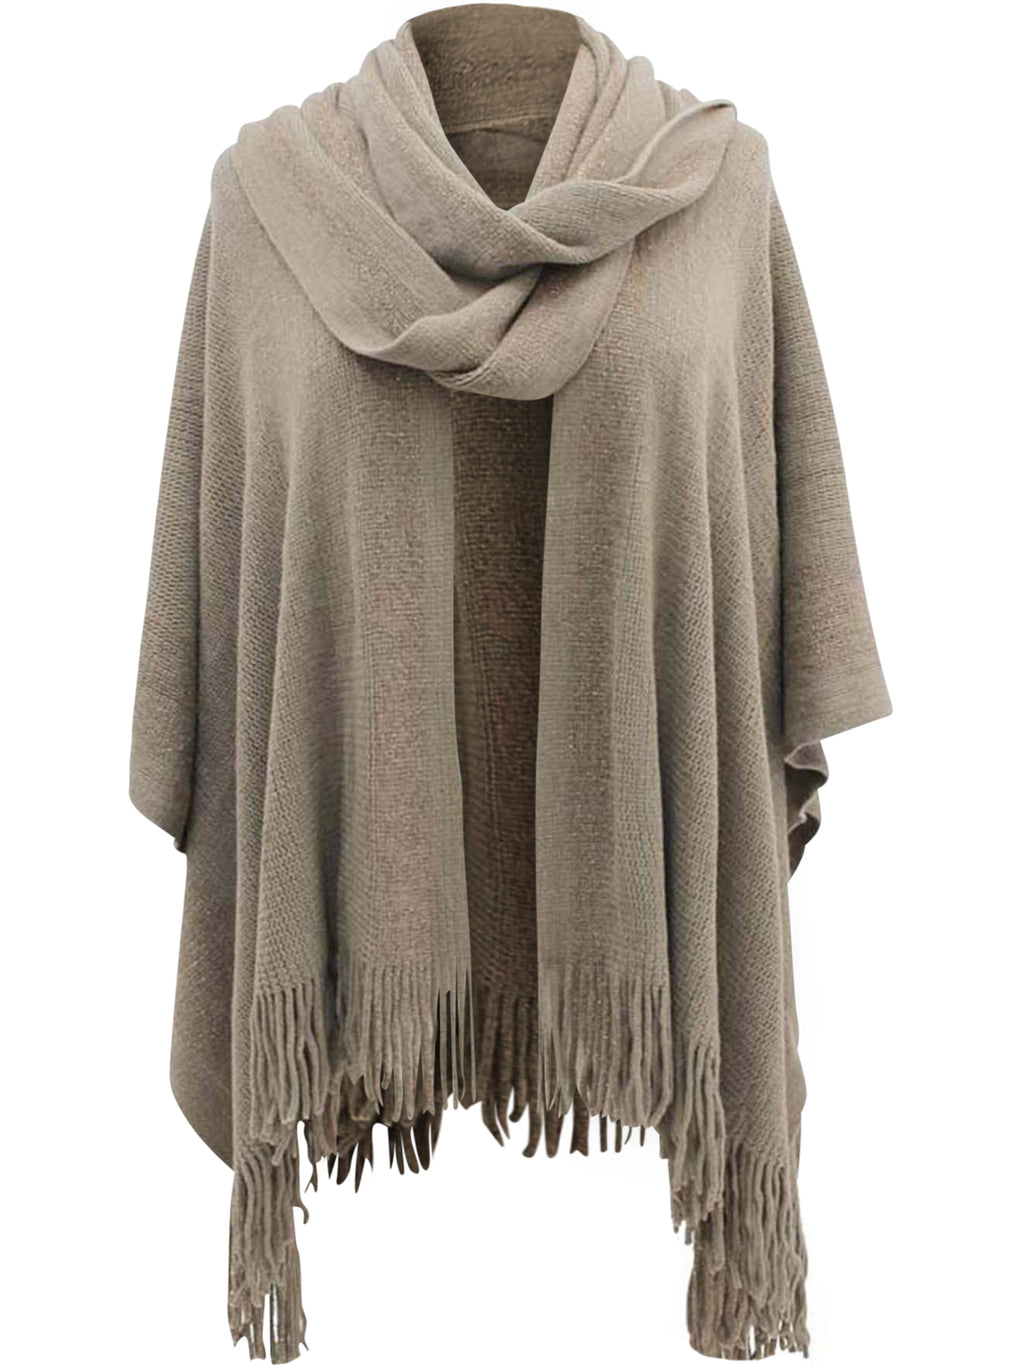 Two-Tone Fringed Shawl With Attached Scarf